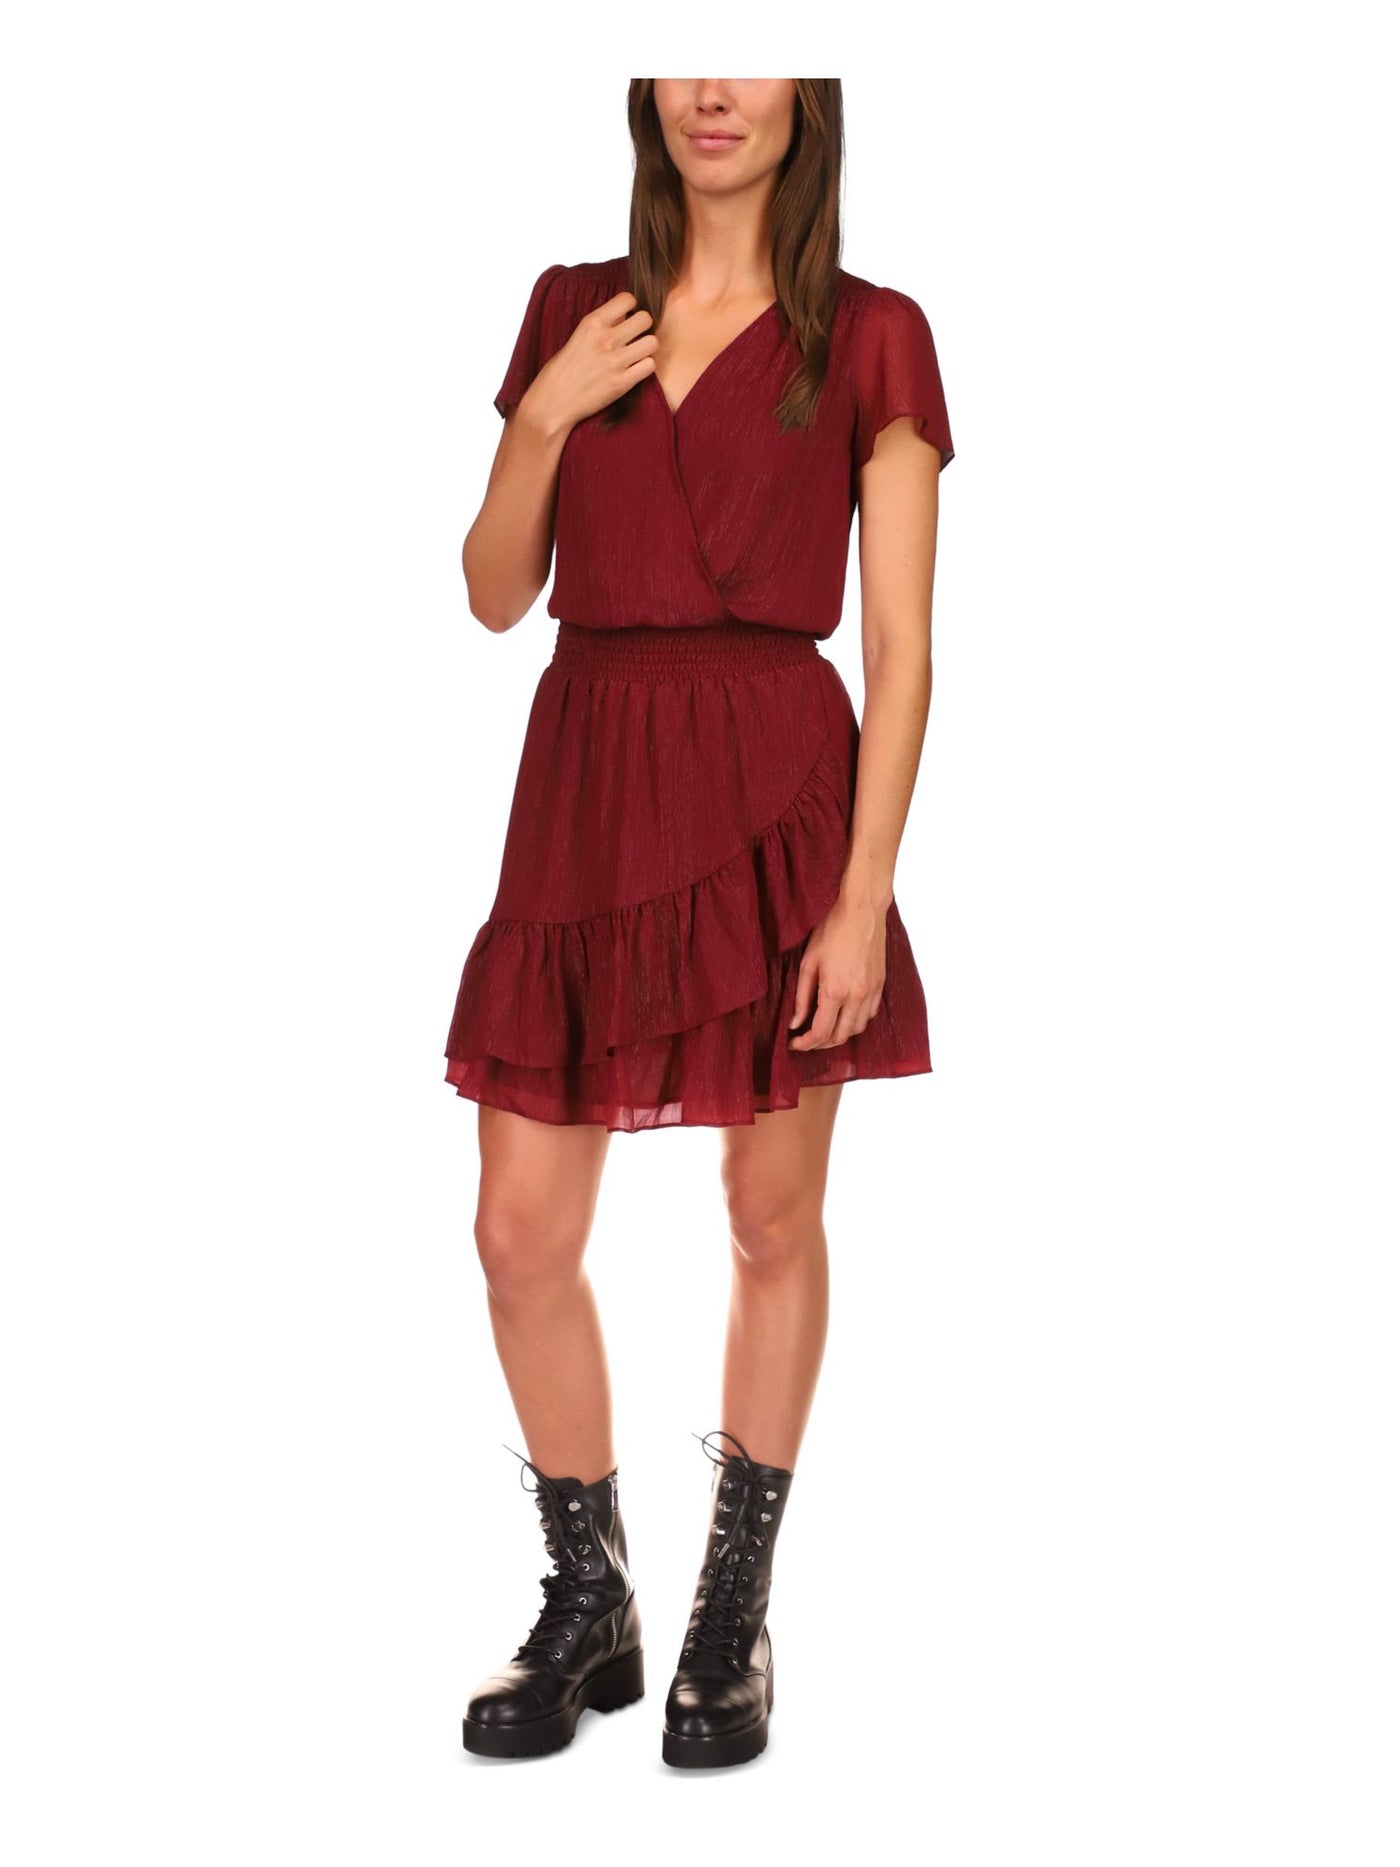 MICHAEL MICHAEL KORS Womens Burgundy Smocked Sheer Lined Ruffled Hook And Eye Front Short Sleeve Surplice Neckline Above The Knee A-Line Dress XL